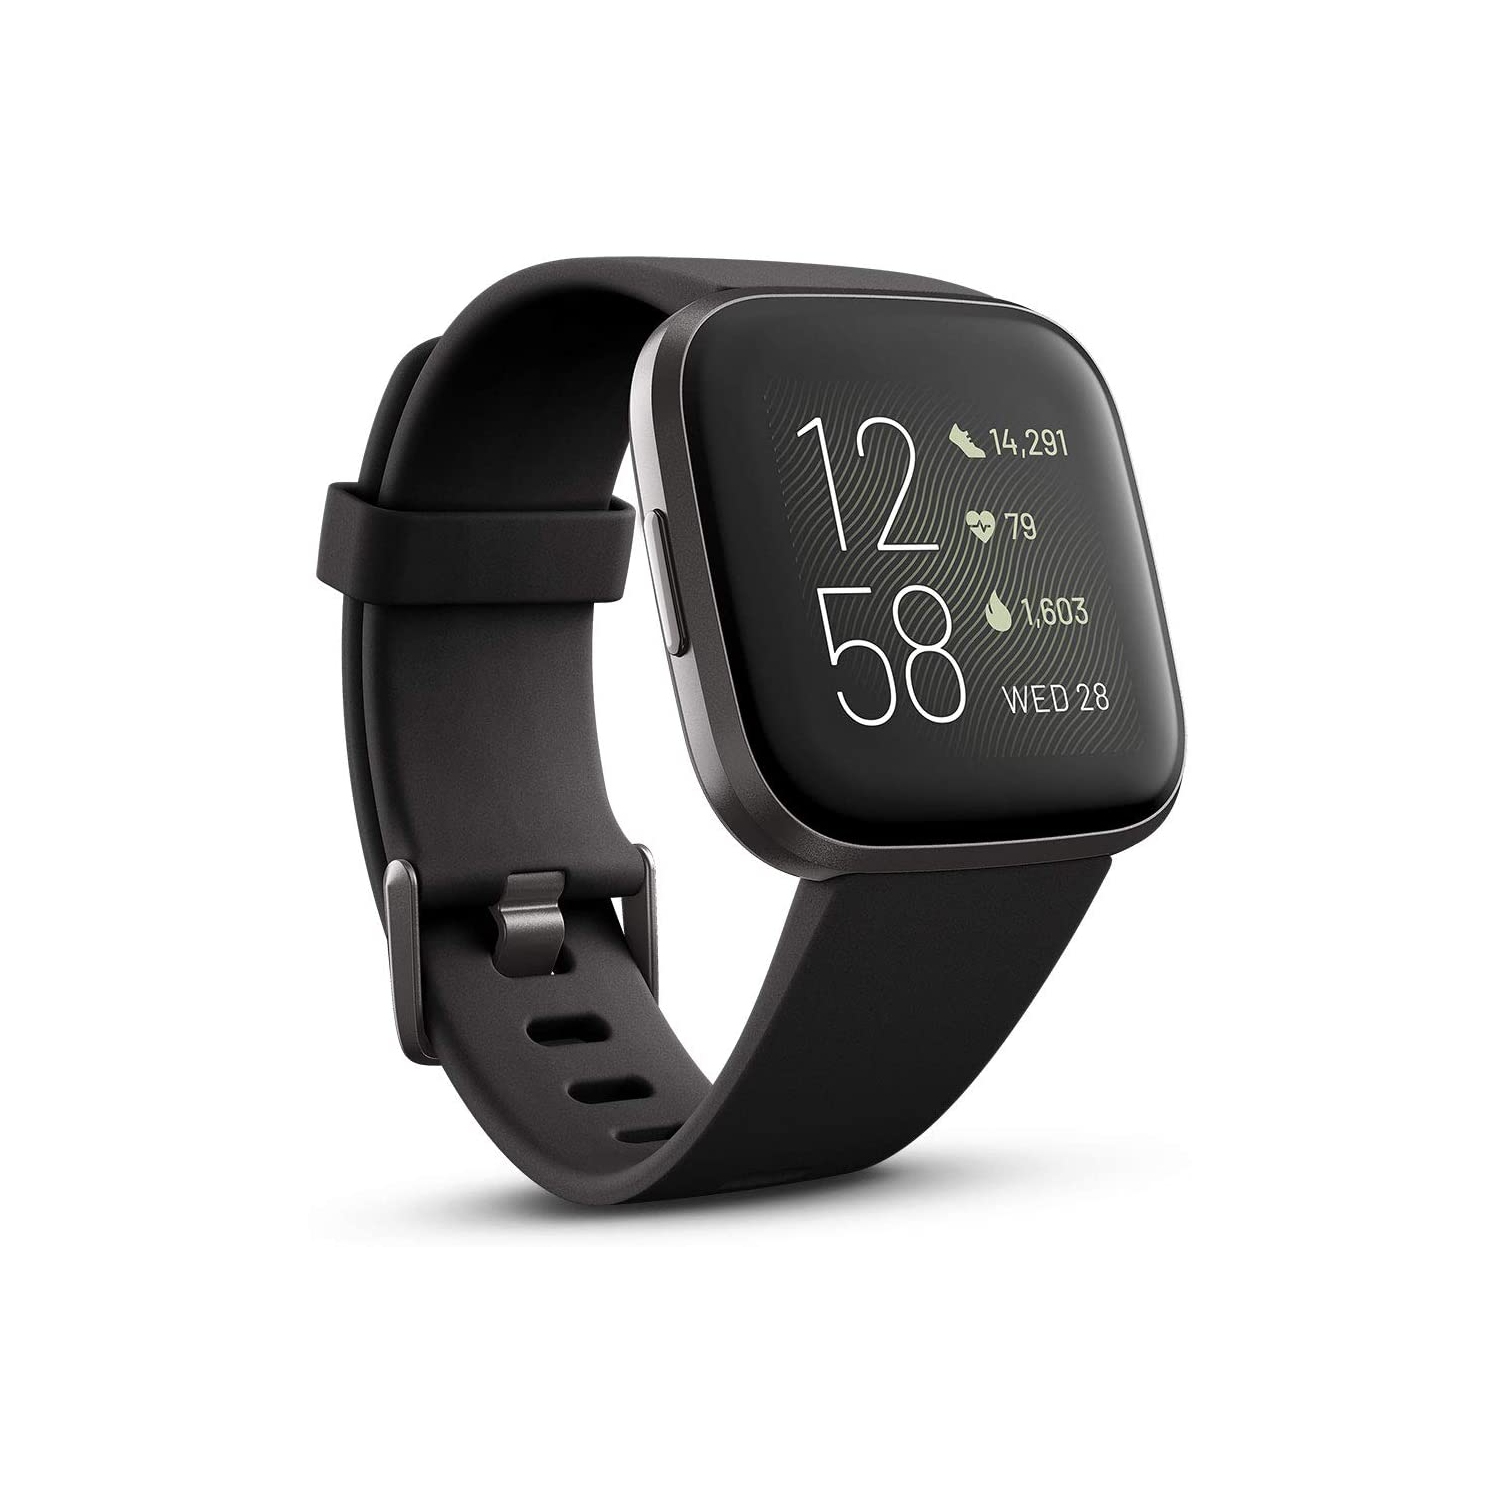 Fitbit Versa 2 40mm Smartwatch with Amazon Alexa & Heart Rate Tracking - Black Brand new